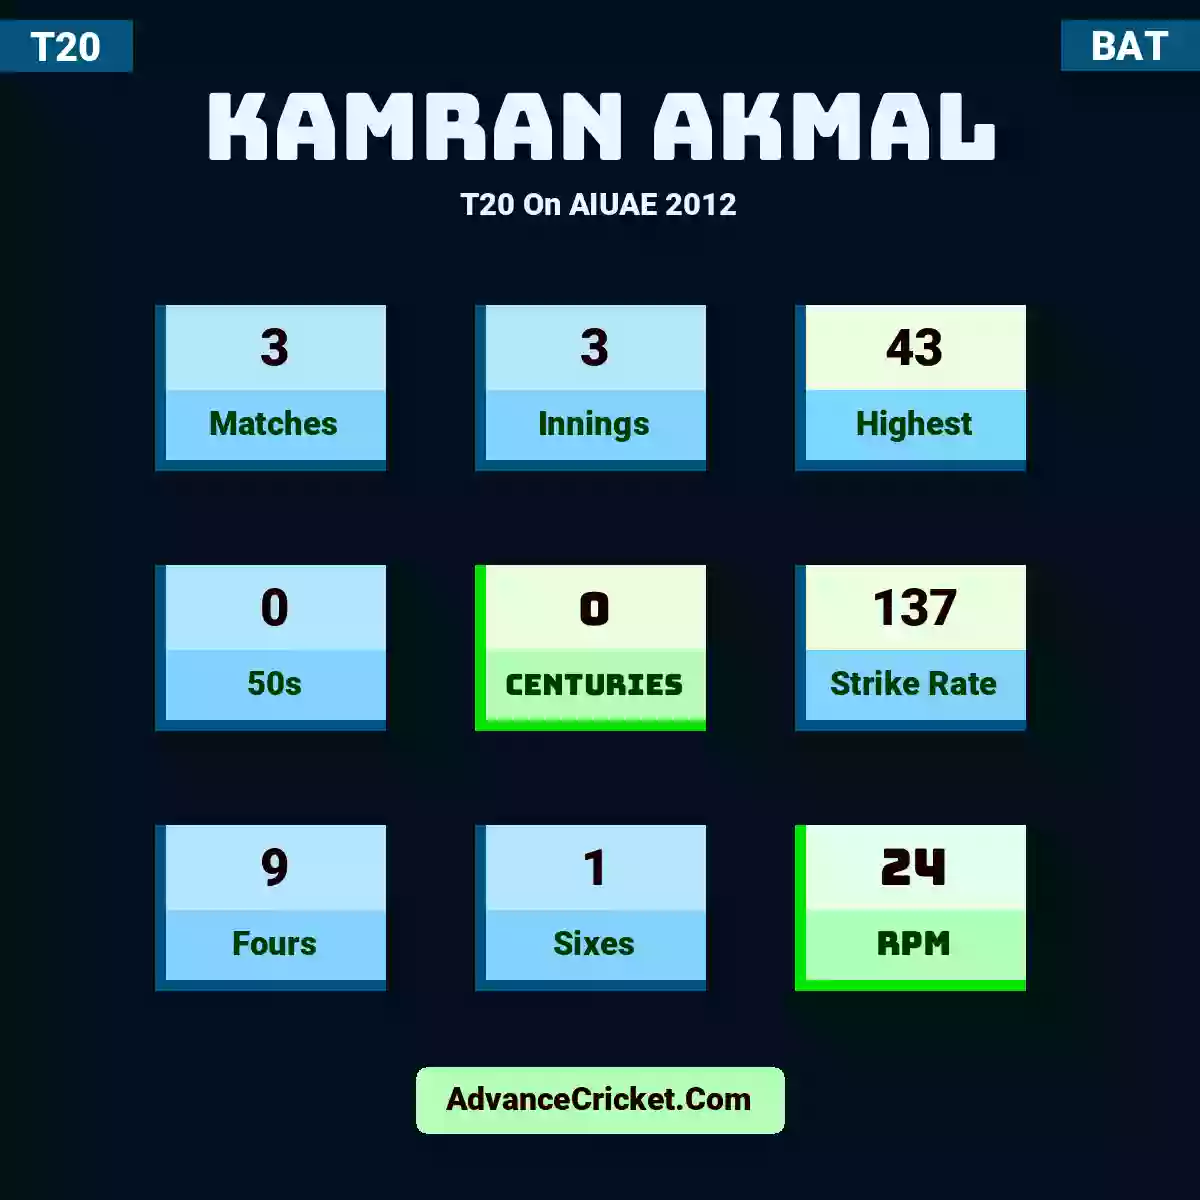 Kamran Akmal T20  On AIUAE 2012, Kamran Akmal played 3 matches, scored 43 runs as highest, 0 half-centuries, and 0 centuries, with a strike rate of 137. K.Akmal hit 9 fours and 1 sixes, with an RPM of 24.